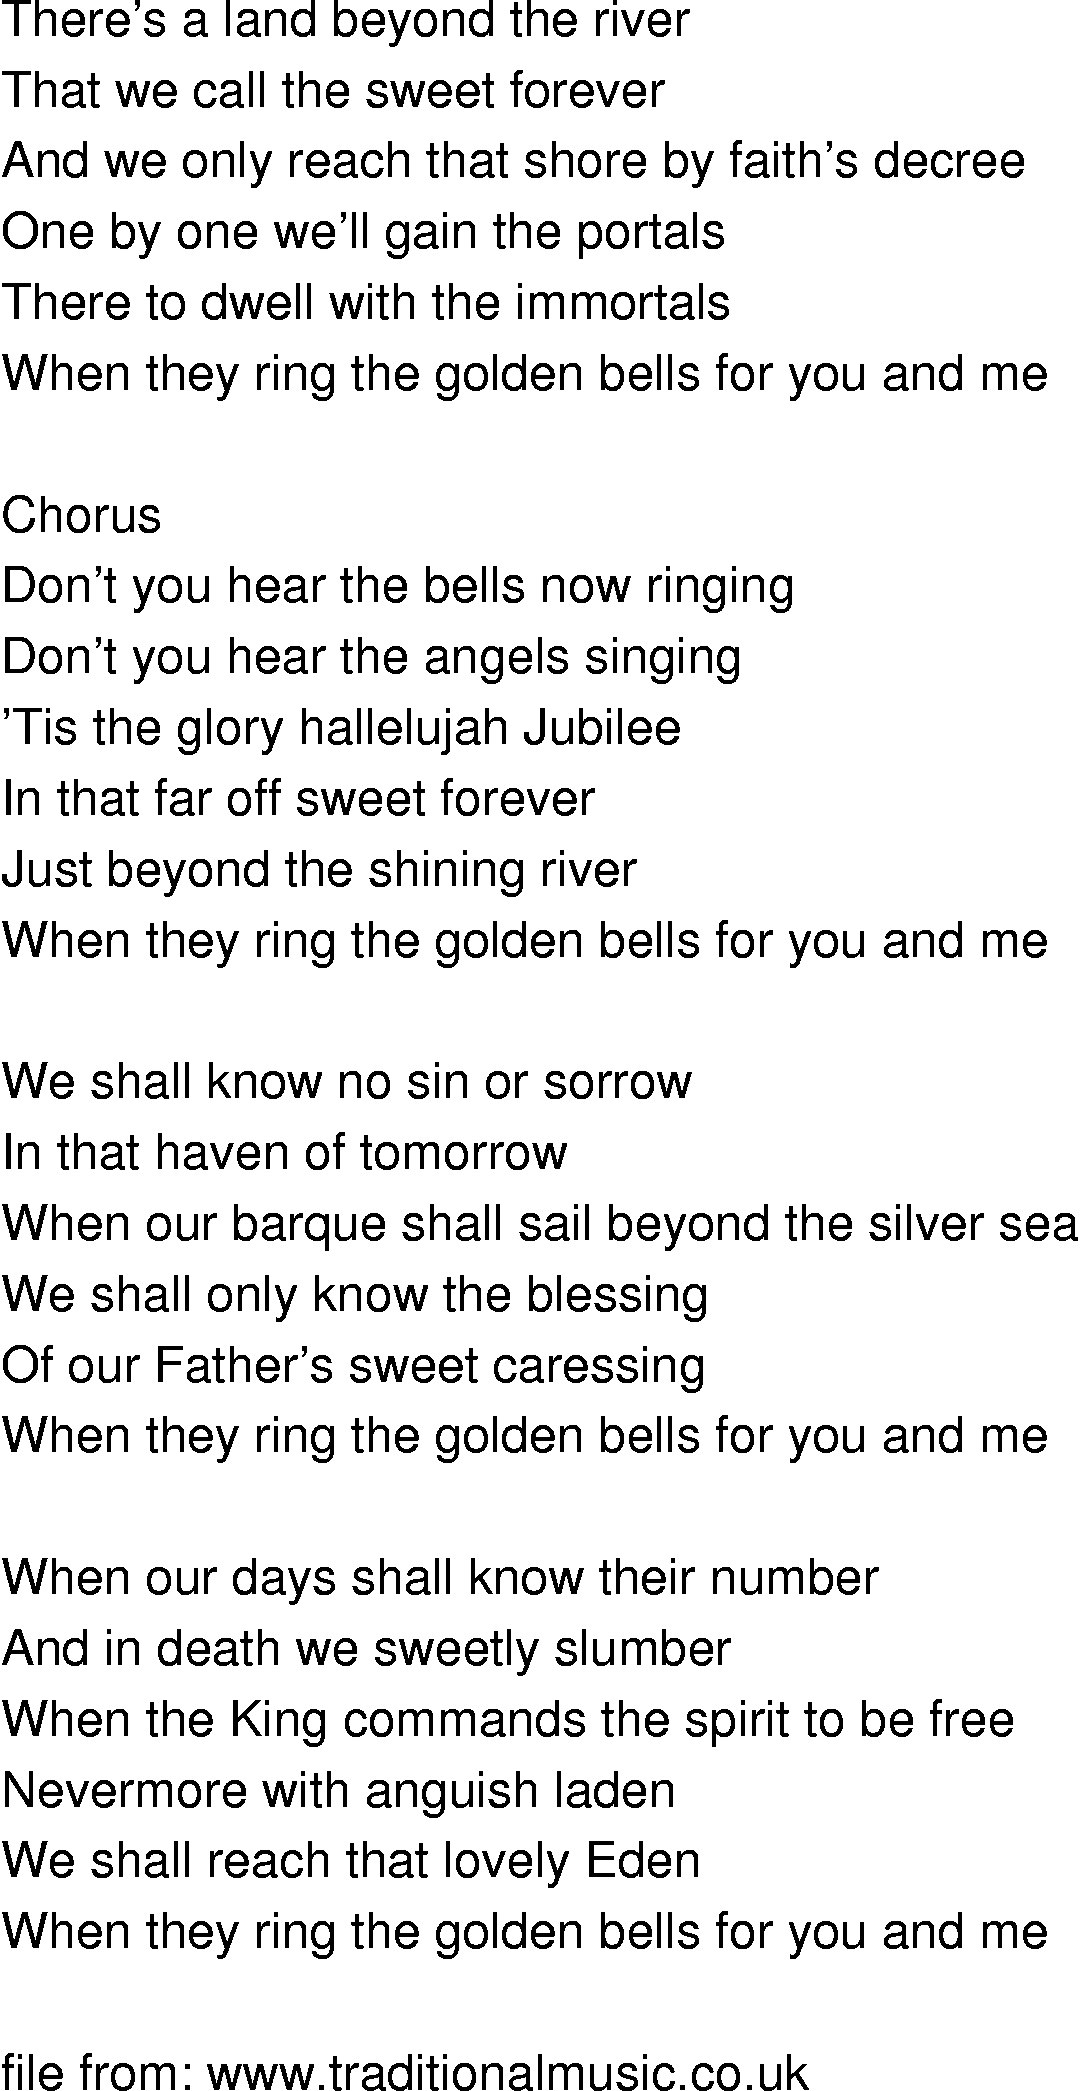 Old Time Song Lyrics When They Ring The Golden Bells Lyrics to golden ring by george jones from the sony music 100 years: traditional music library